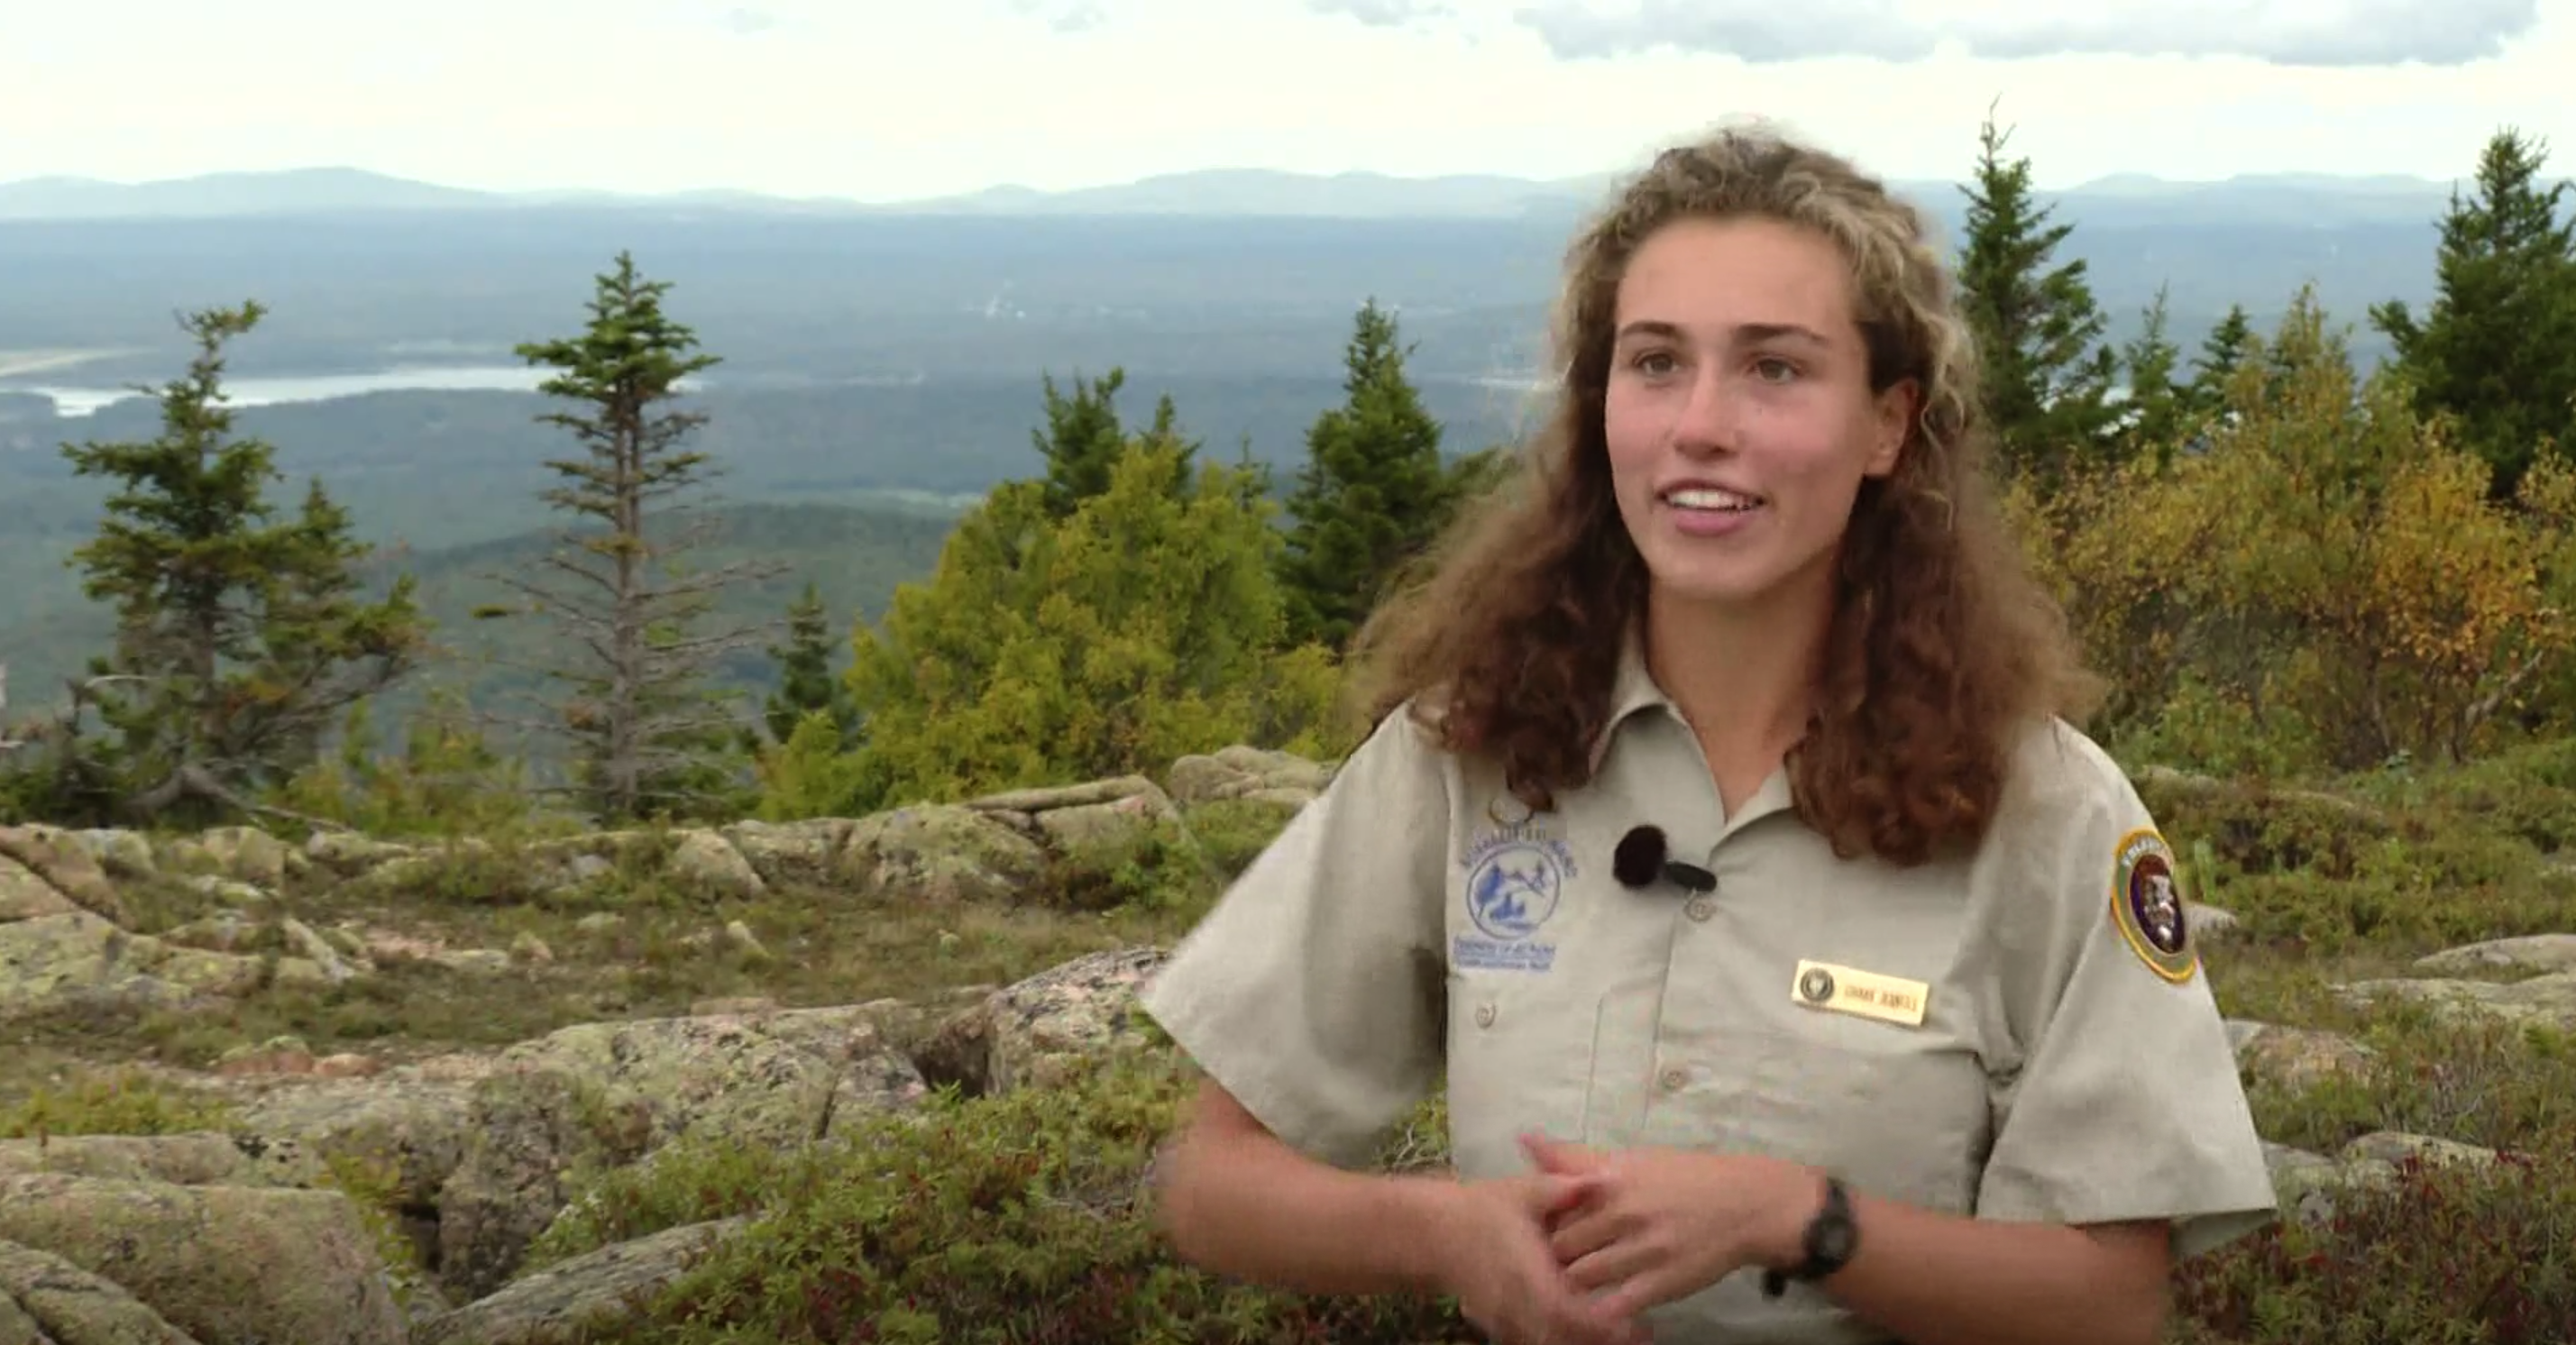 A Day in the Life of a Summit Steward–on News Center Maine’s 207